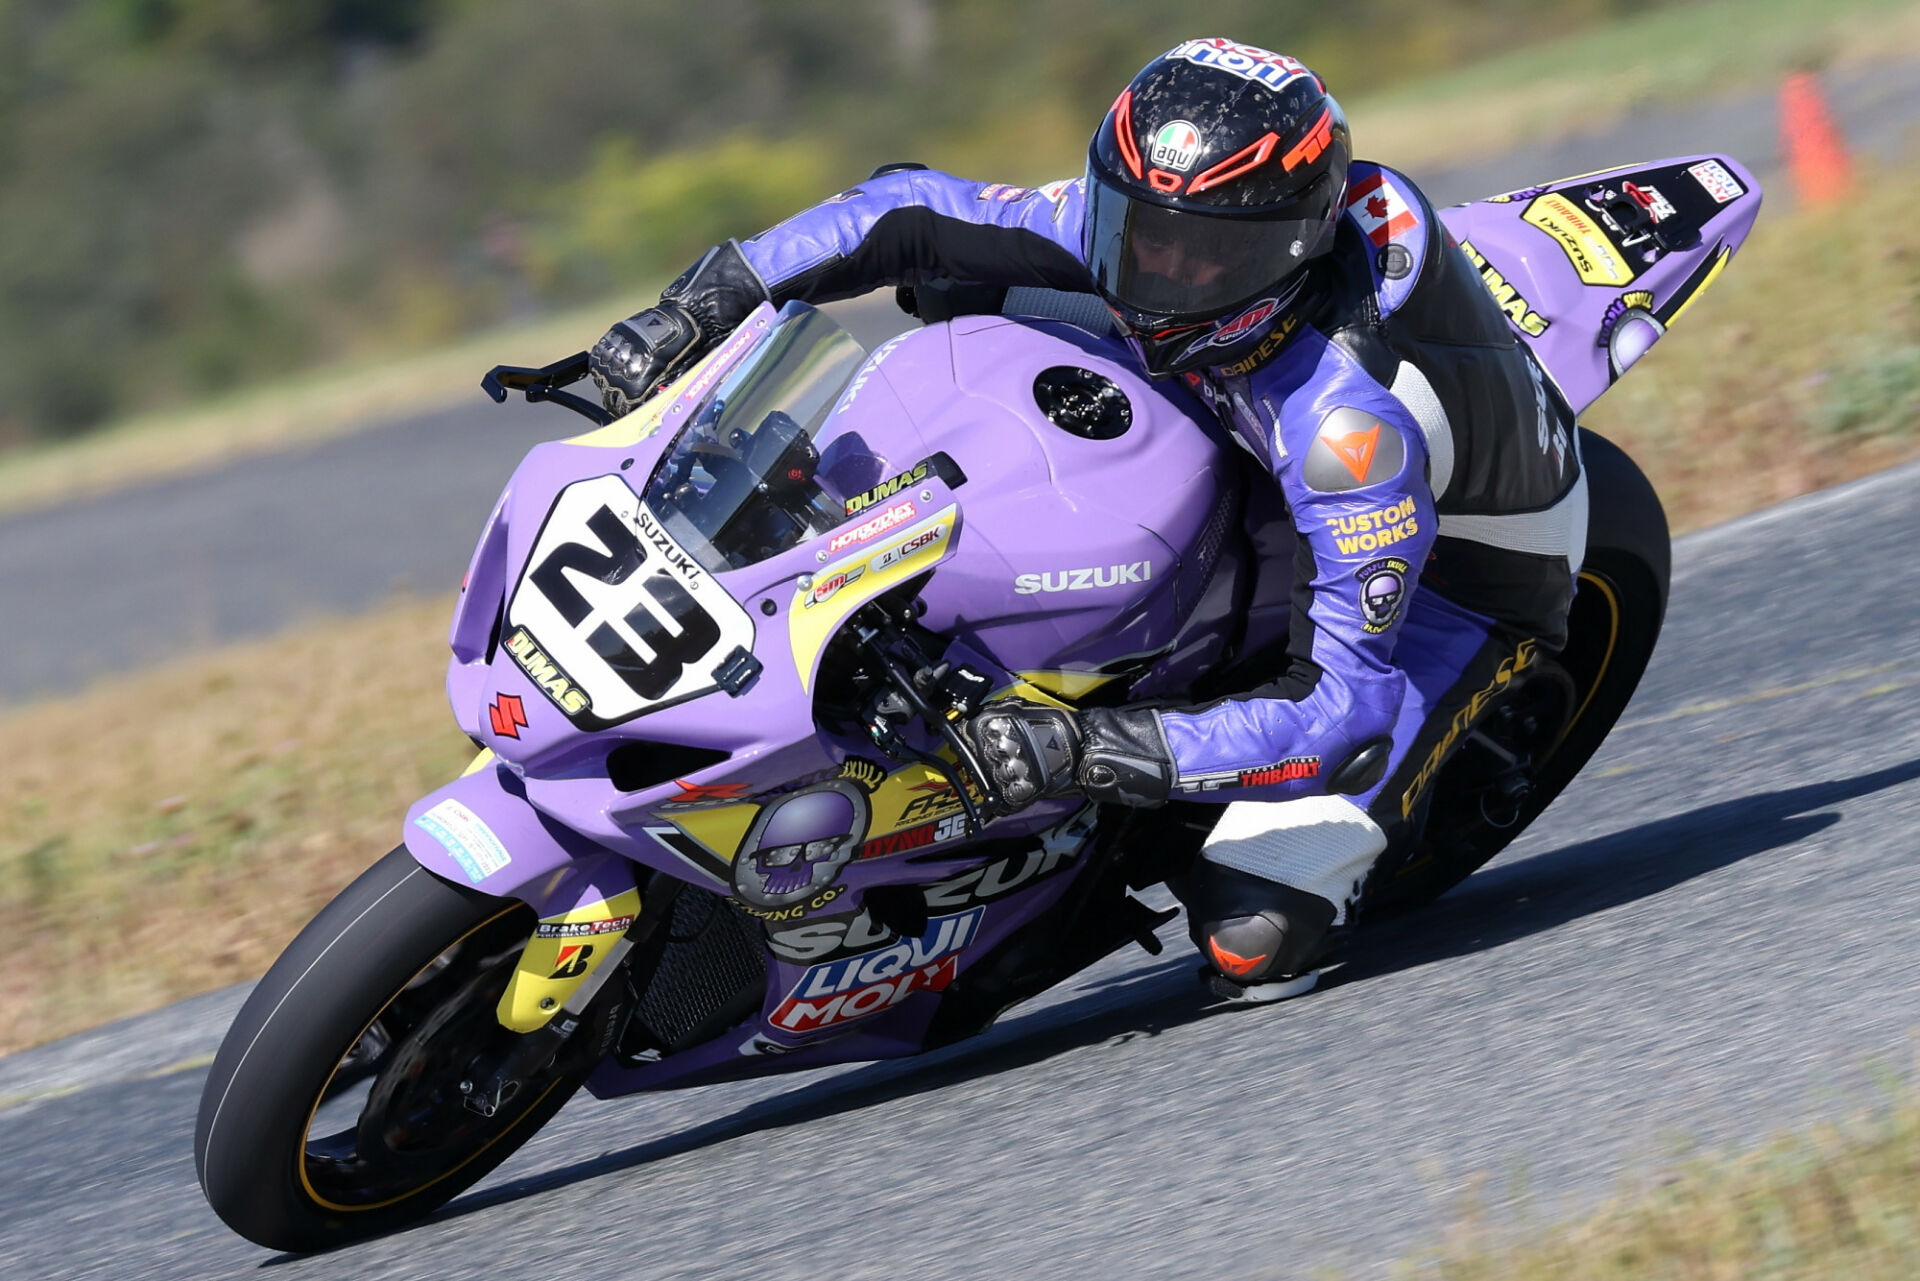 Pro Superbike championship leader Alex Dumas (23) will start all three races this weekend from pole position after narrowly beating Ben Young in Q2 at Shannonville Motorsport Park. Photo by Rob O'Brien, courtesy CSBK.